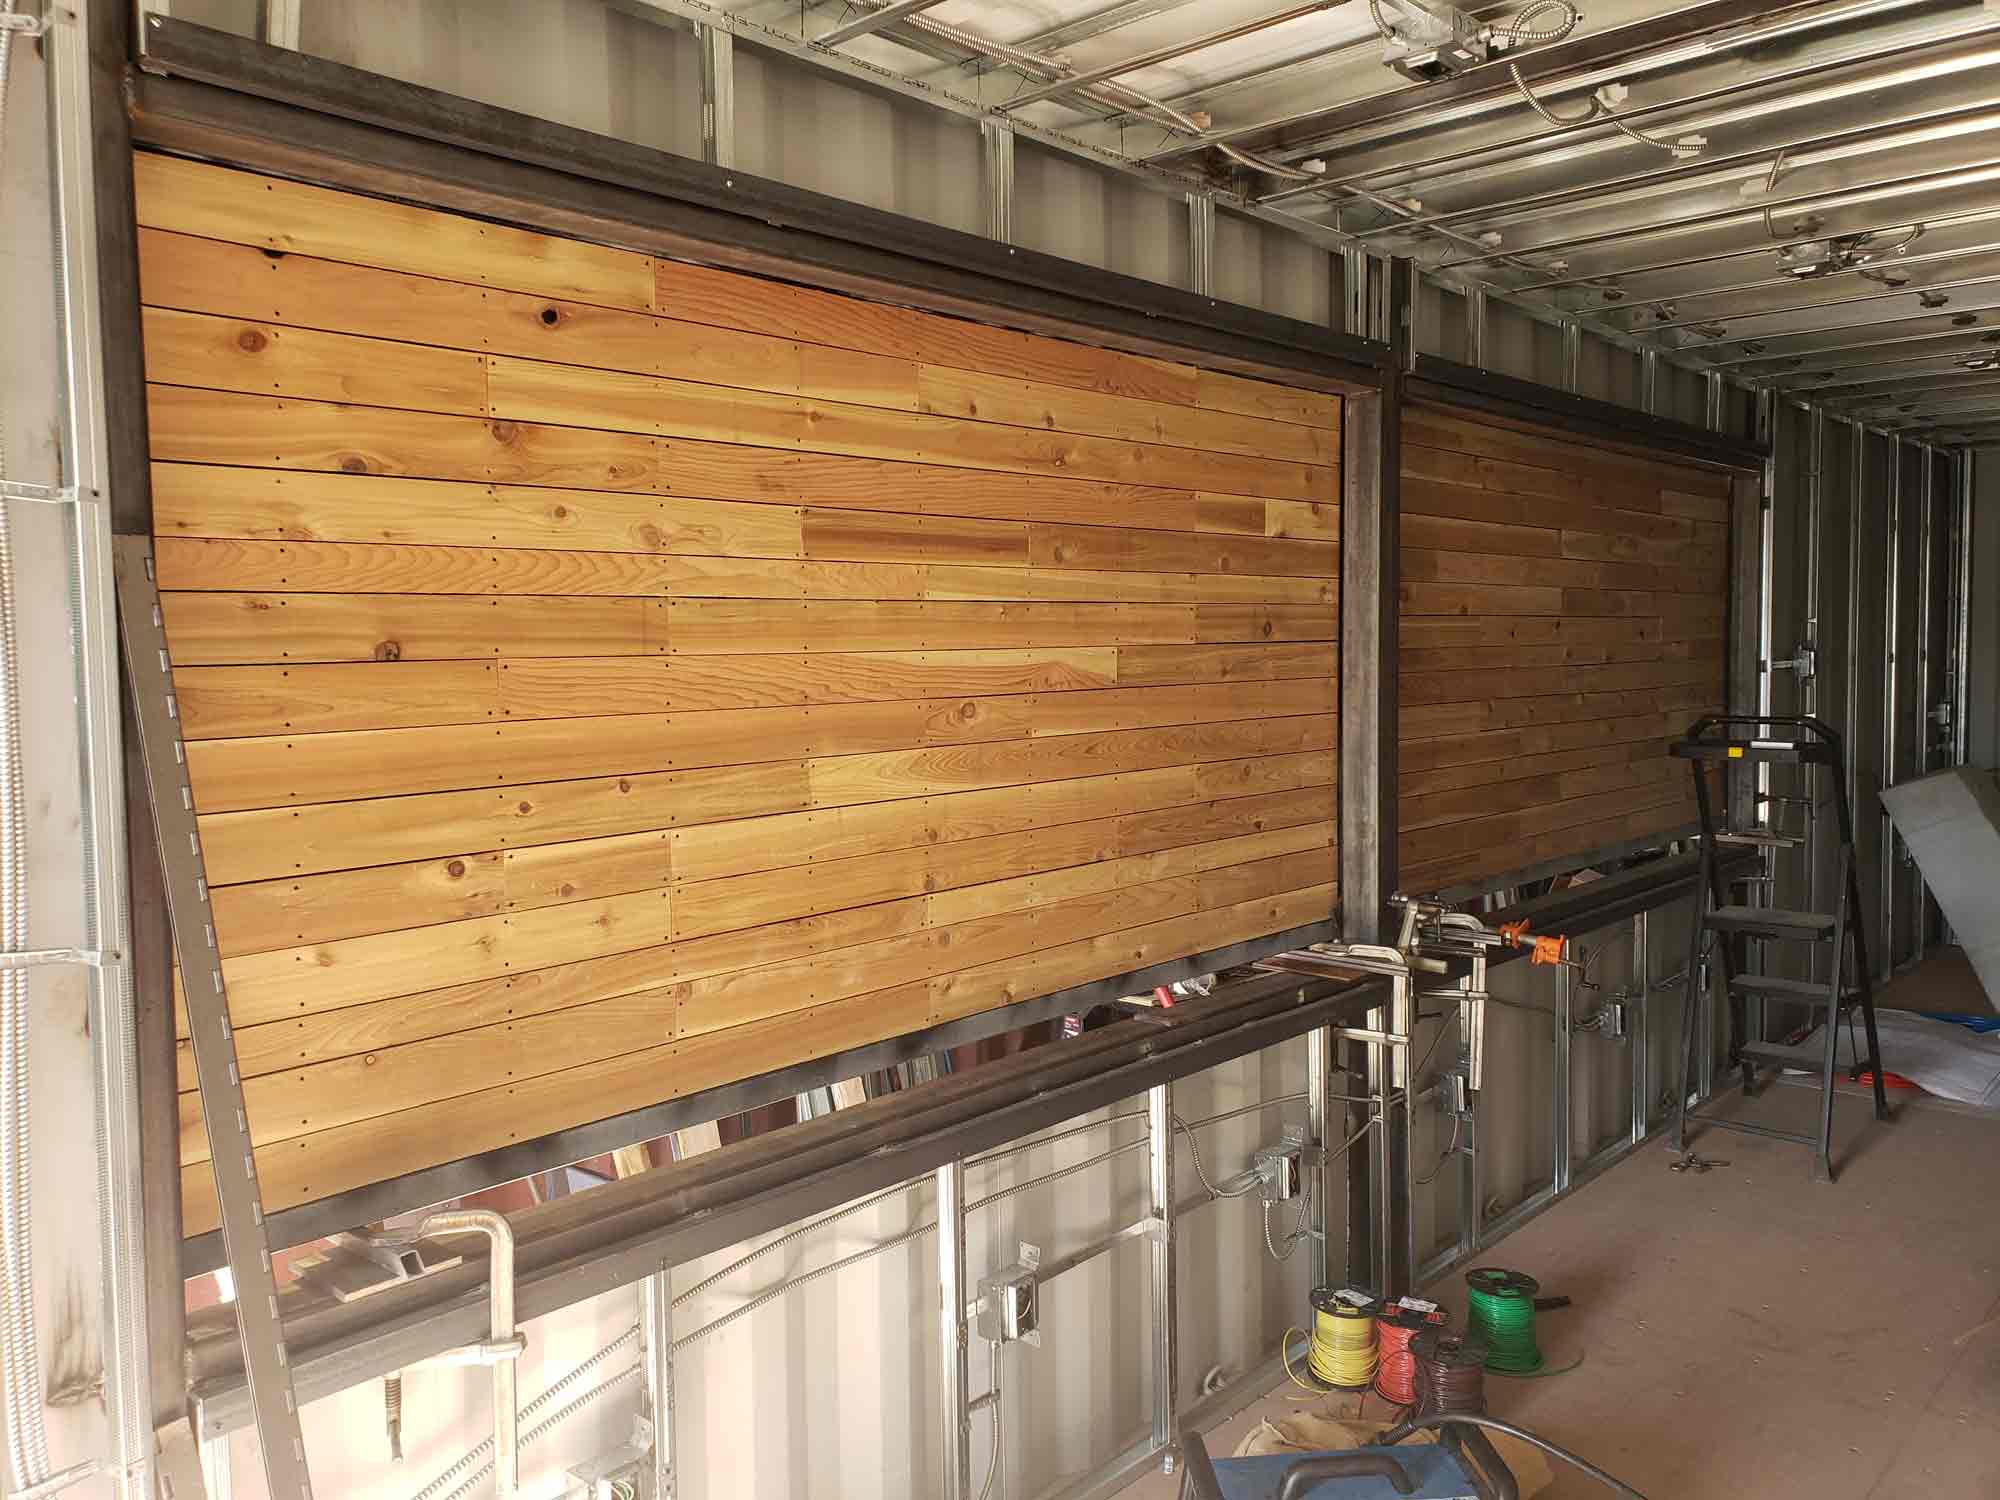 Bradley's custom shipping container kitchen at Winter Park Resort being built out by ROXBOX Containers.